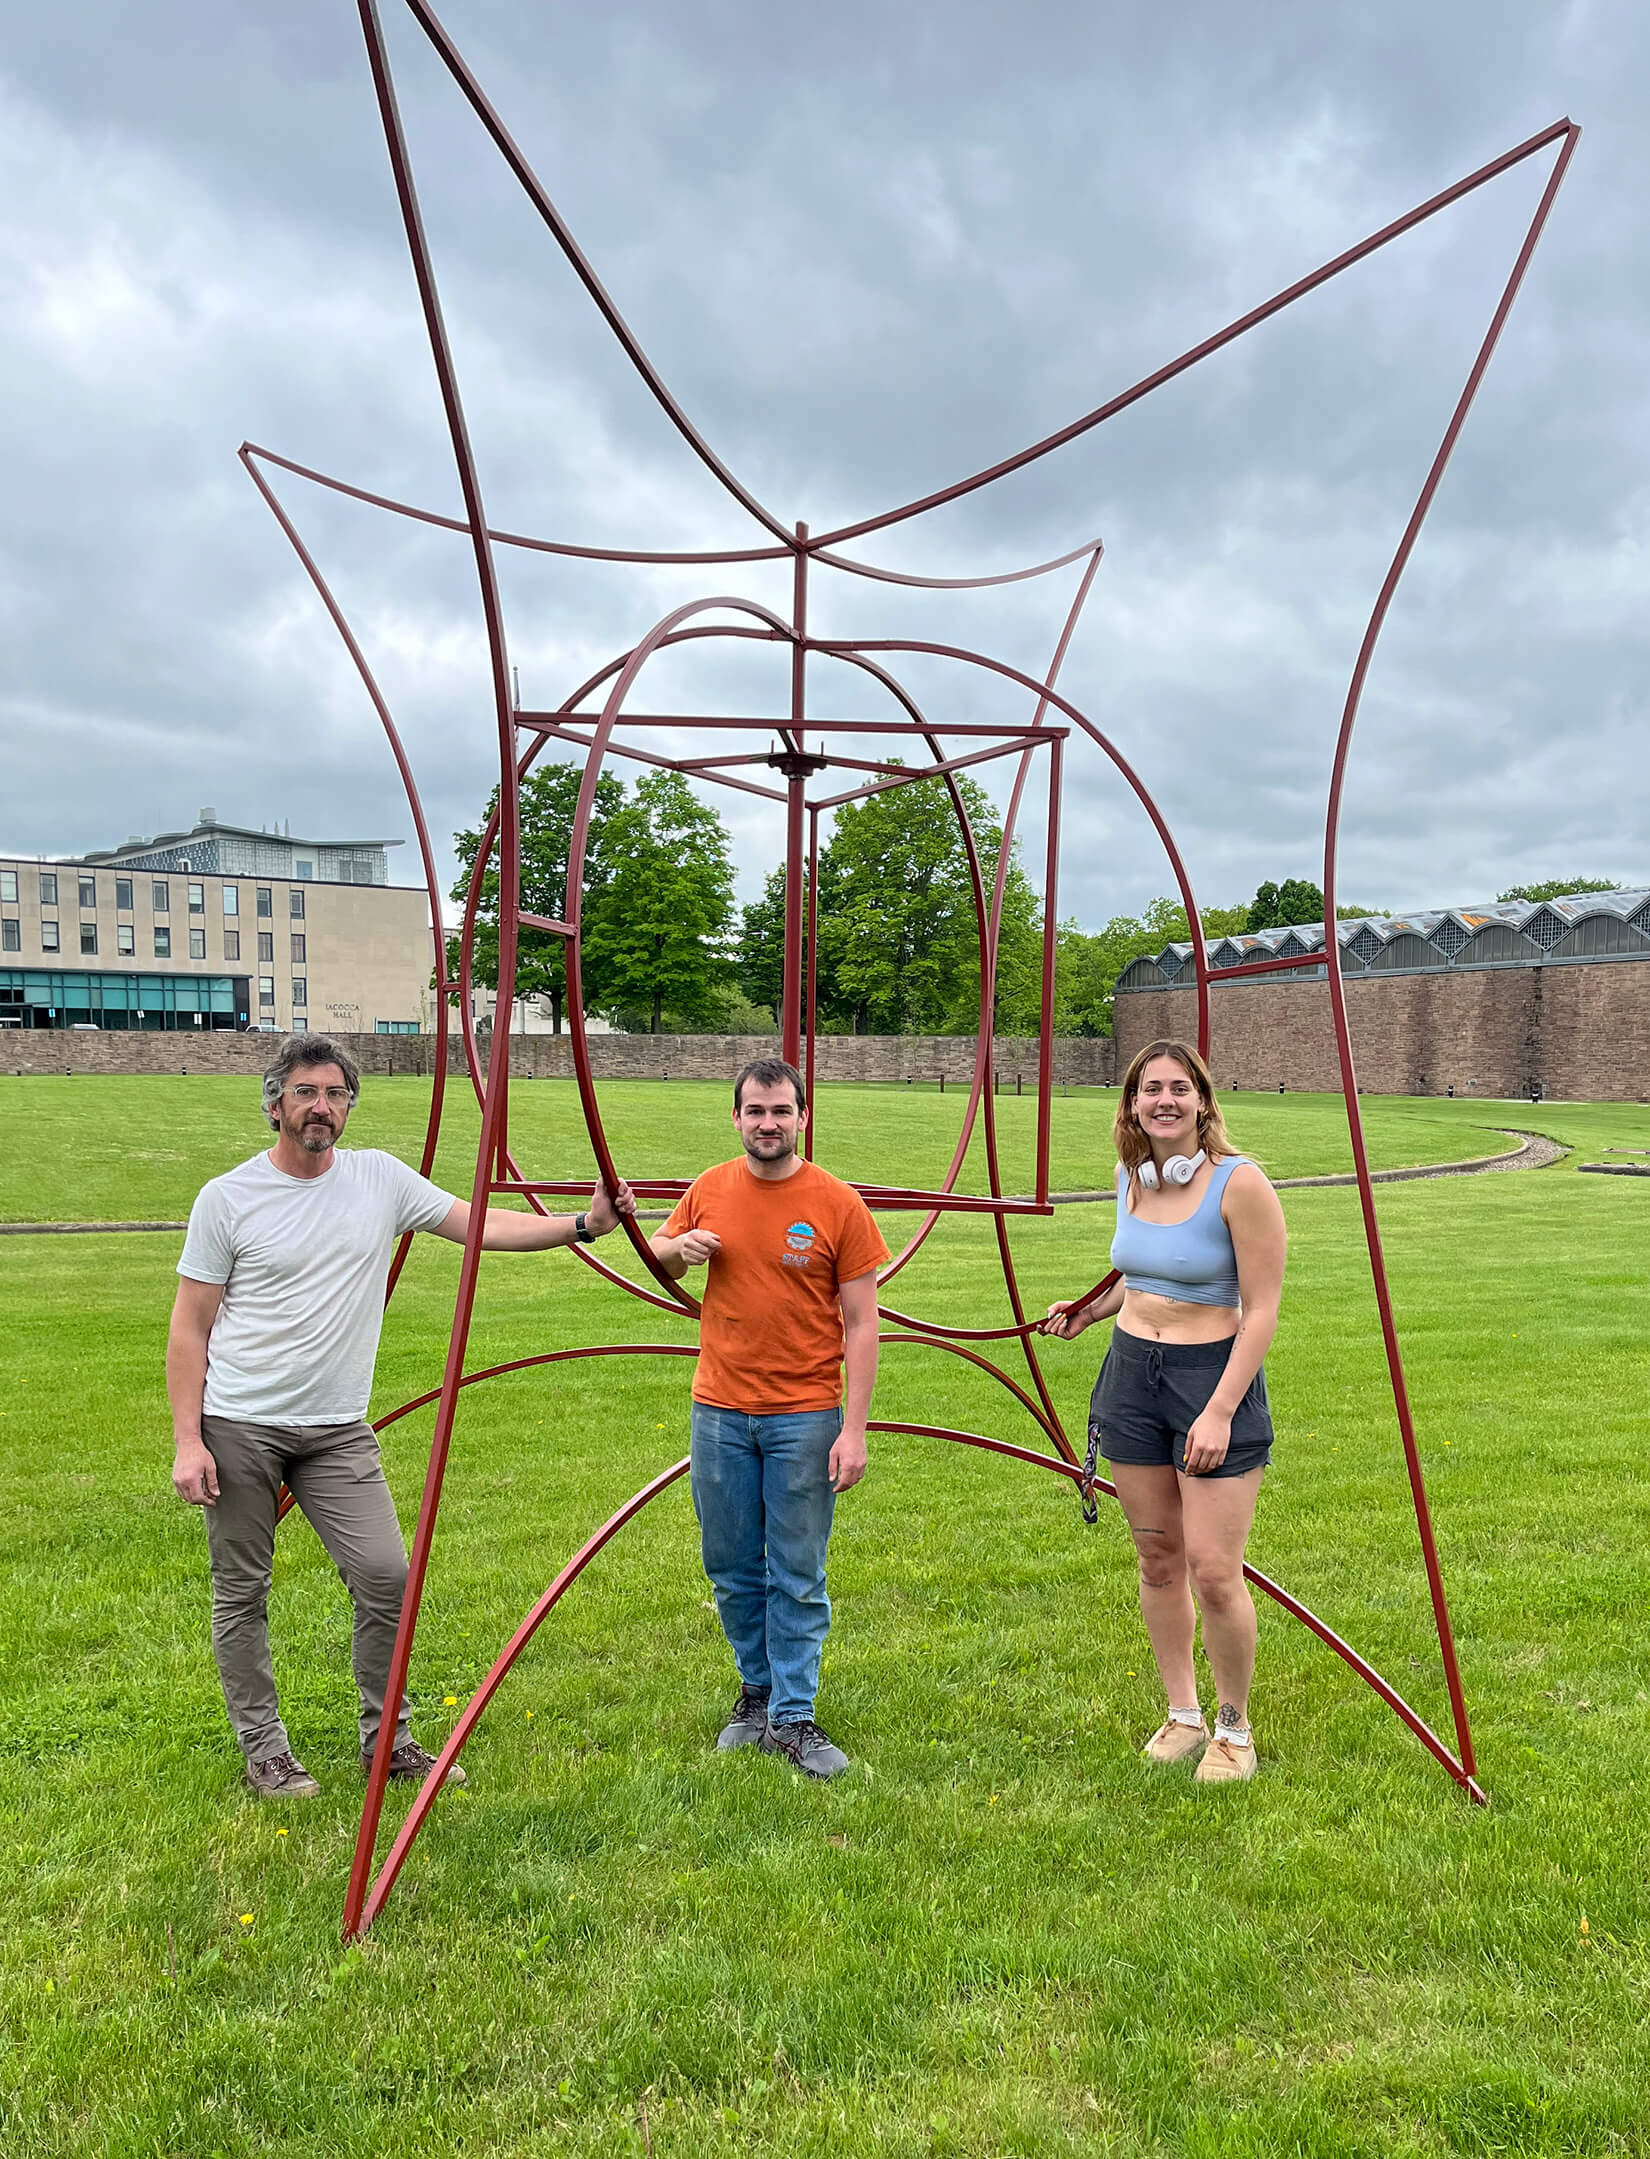 A large piece of red metal art stands in a green space with 3 contributors posing alongside it.